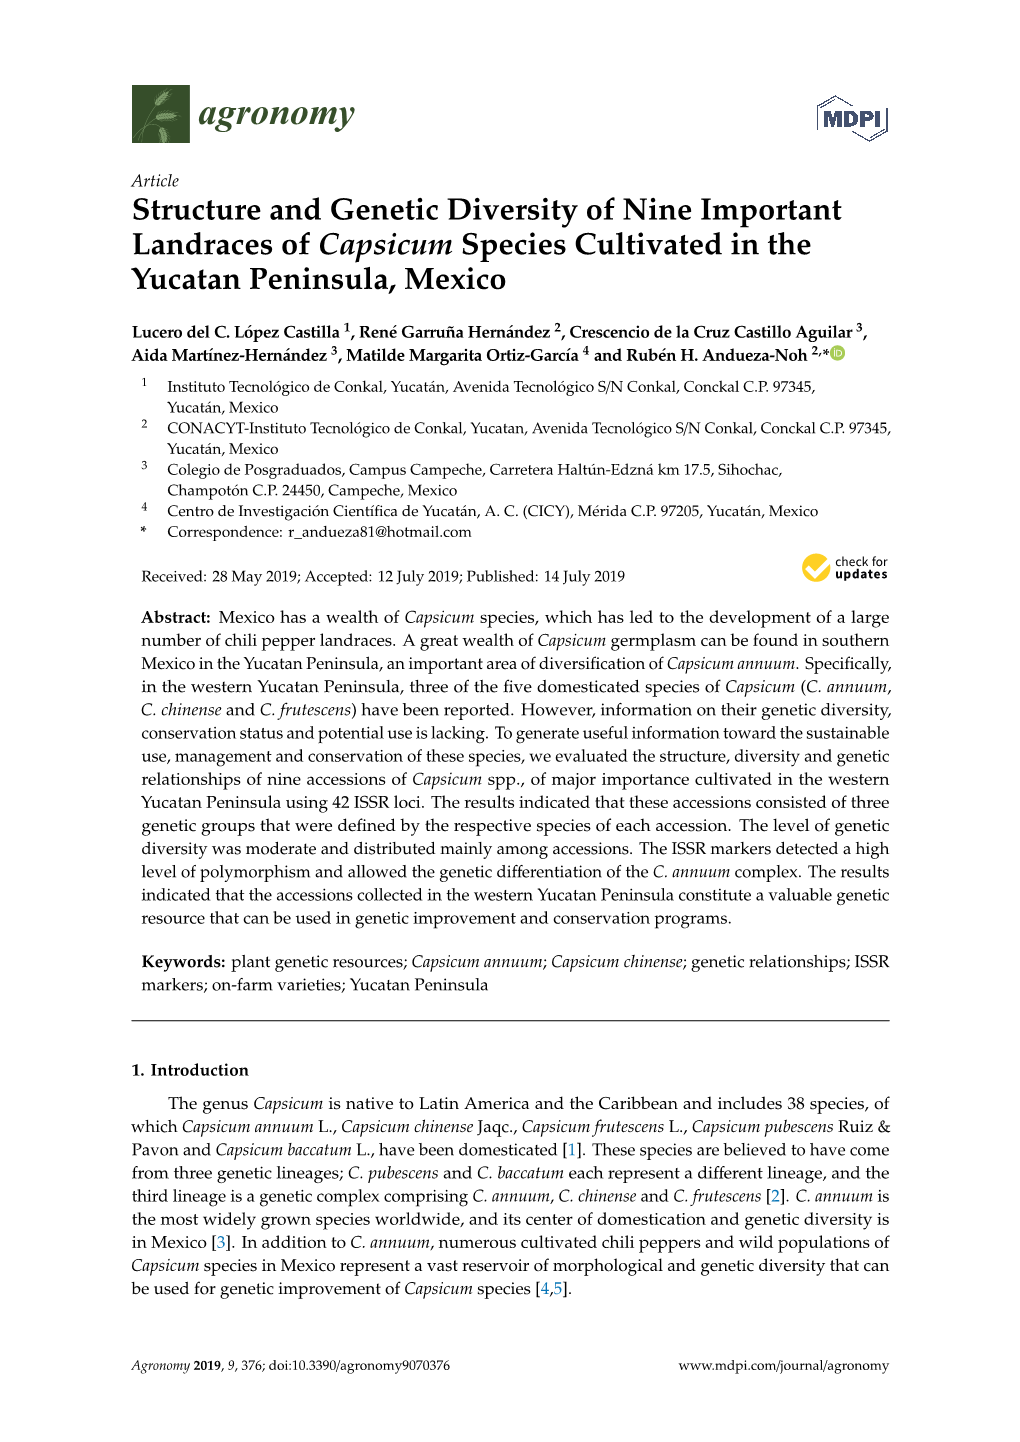 Structure and Genetic Diversity of Nine Important Landraces of Capsicum Species Cultivated in the Yucatan Peninsula, Mexico